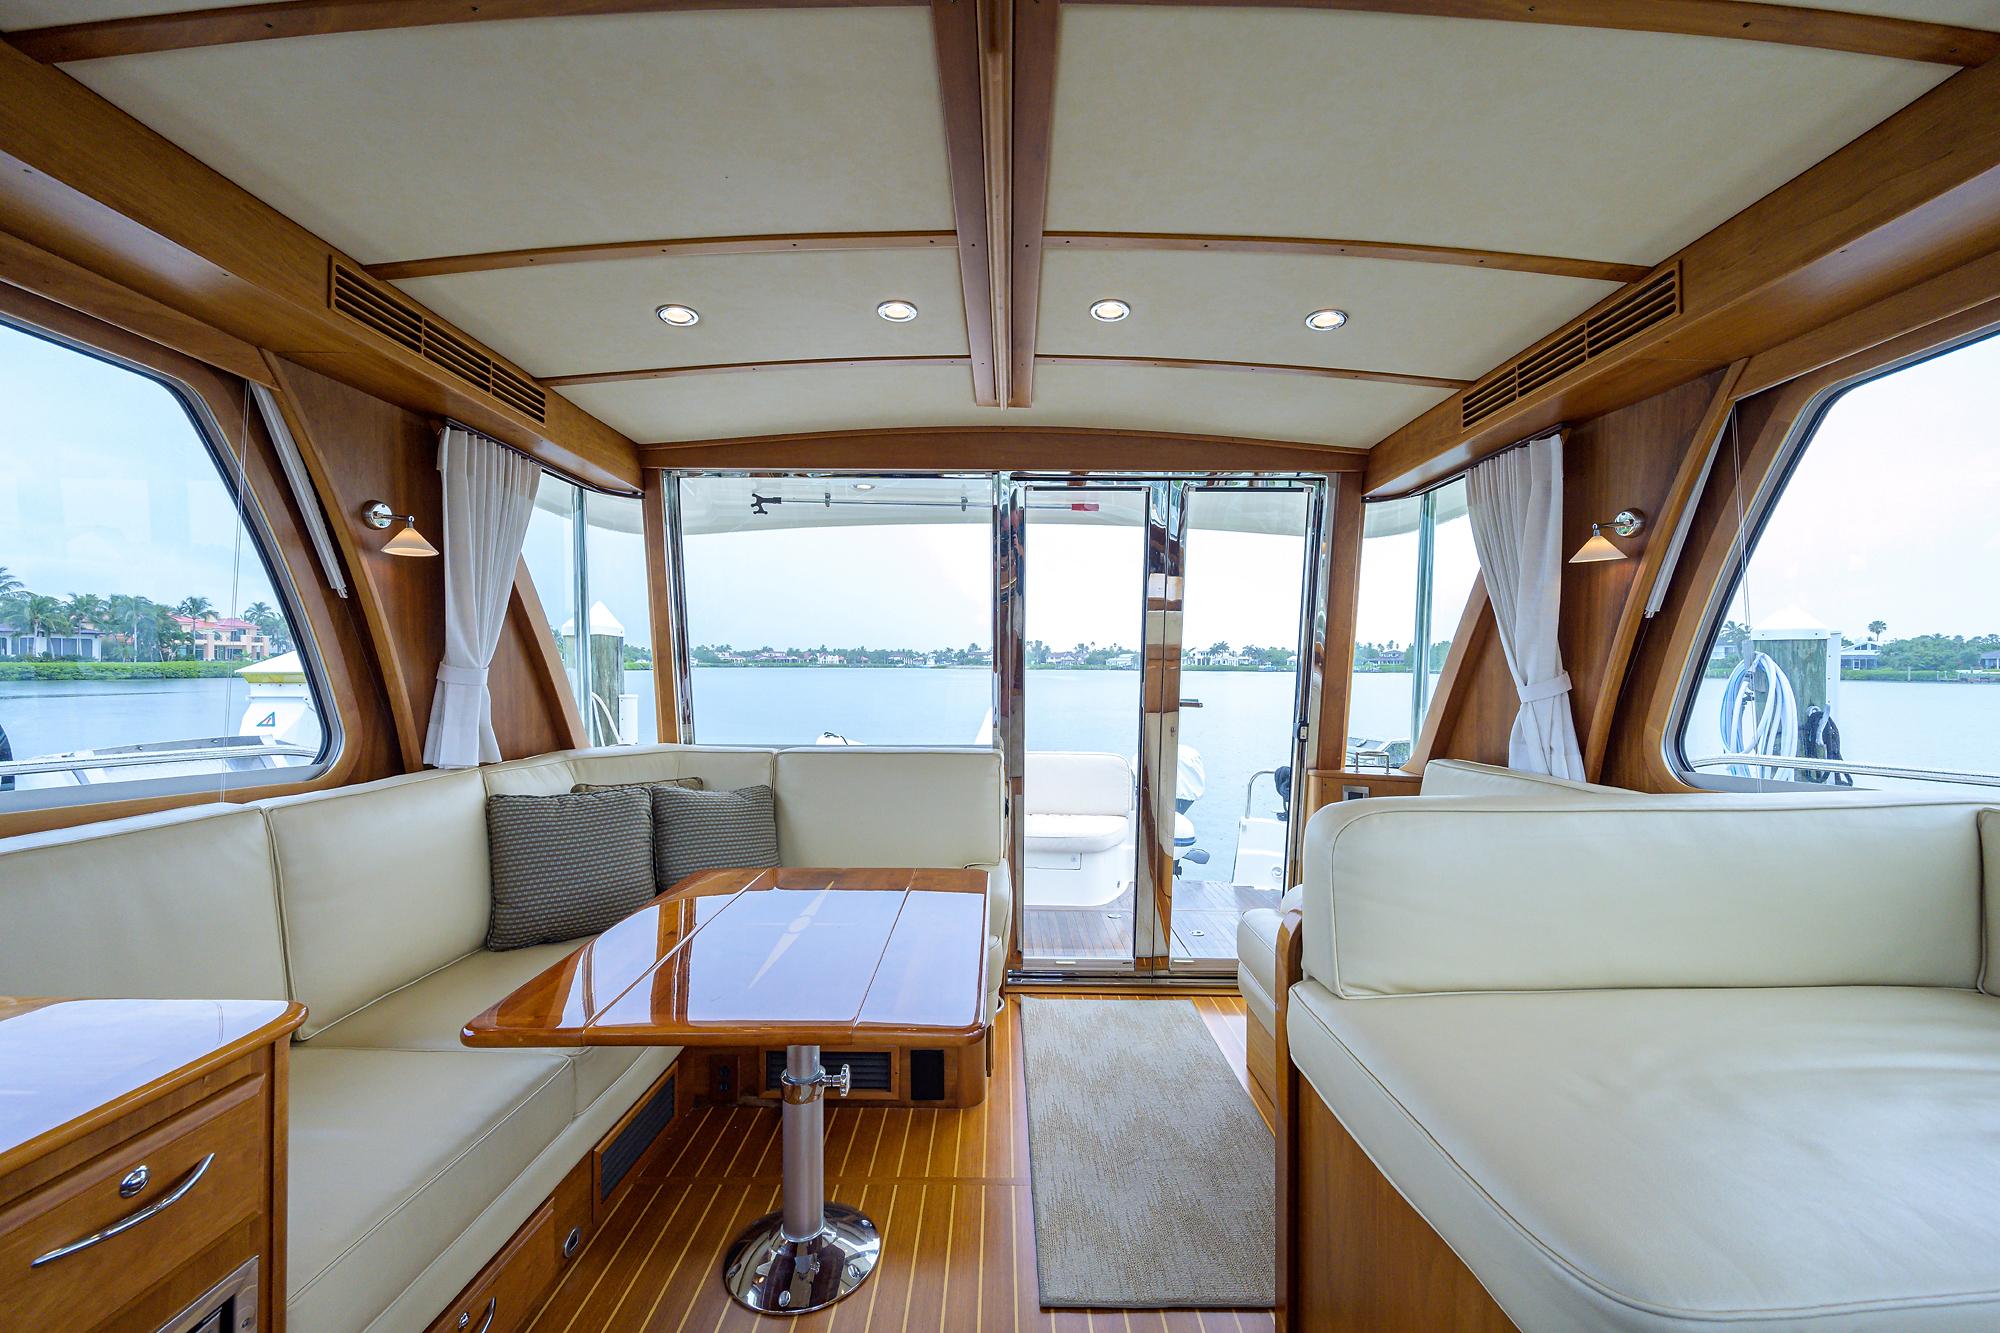 SABRE 48 ODIN - View Of Aft Salon From Helm